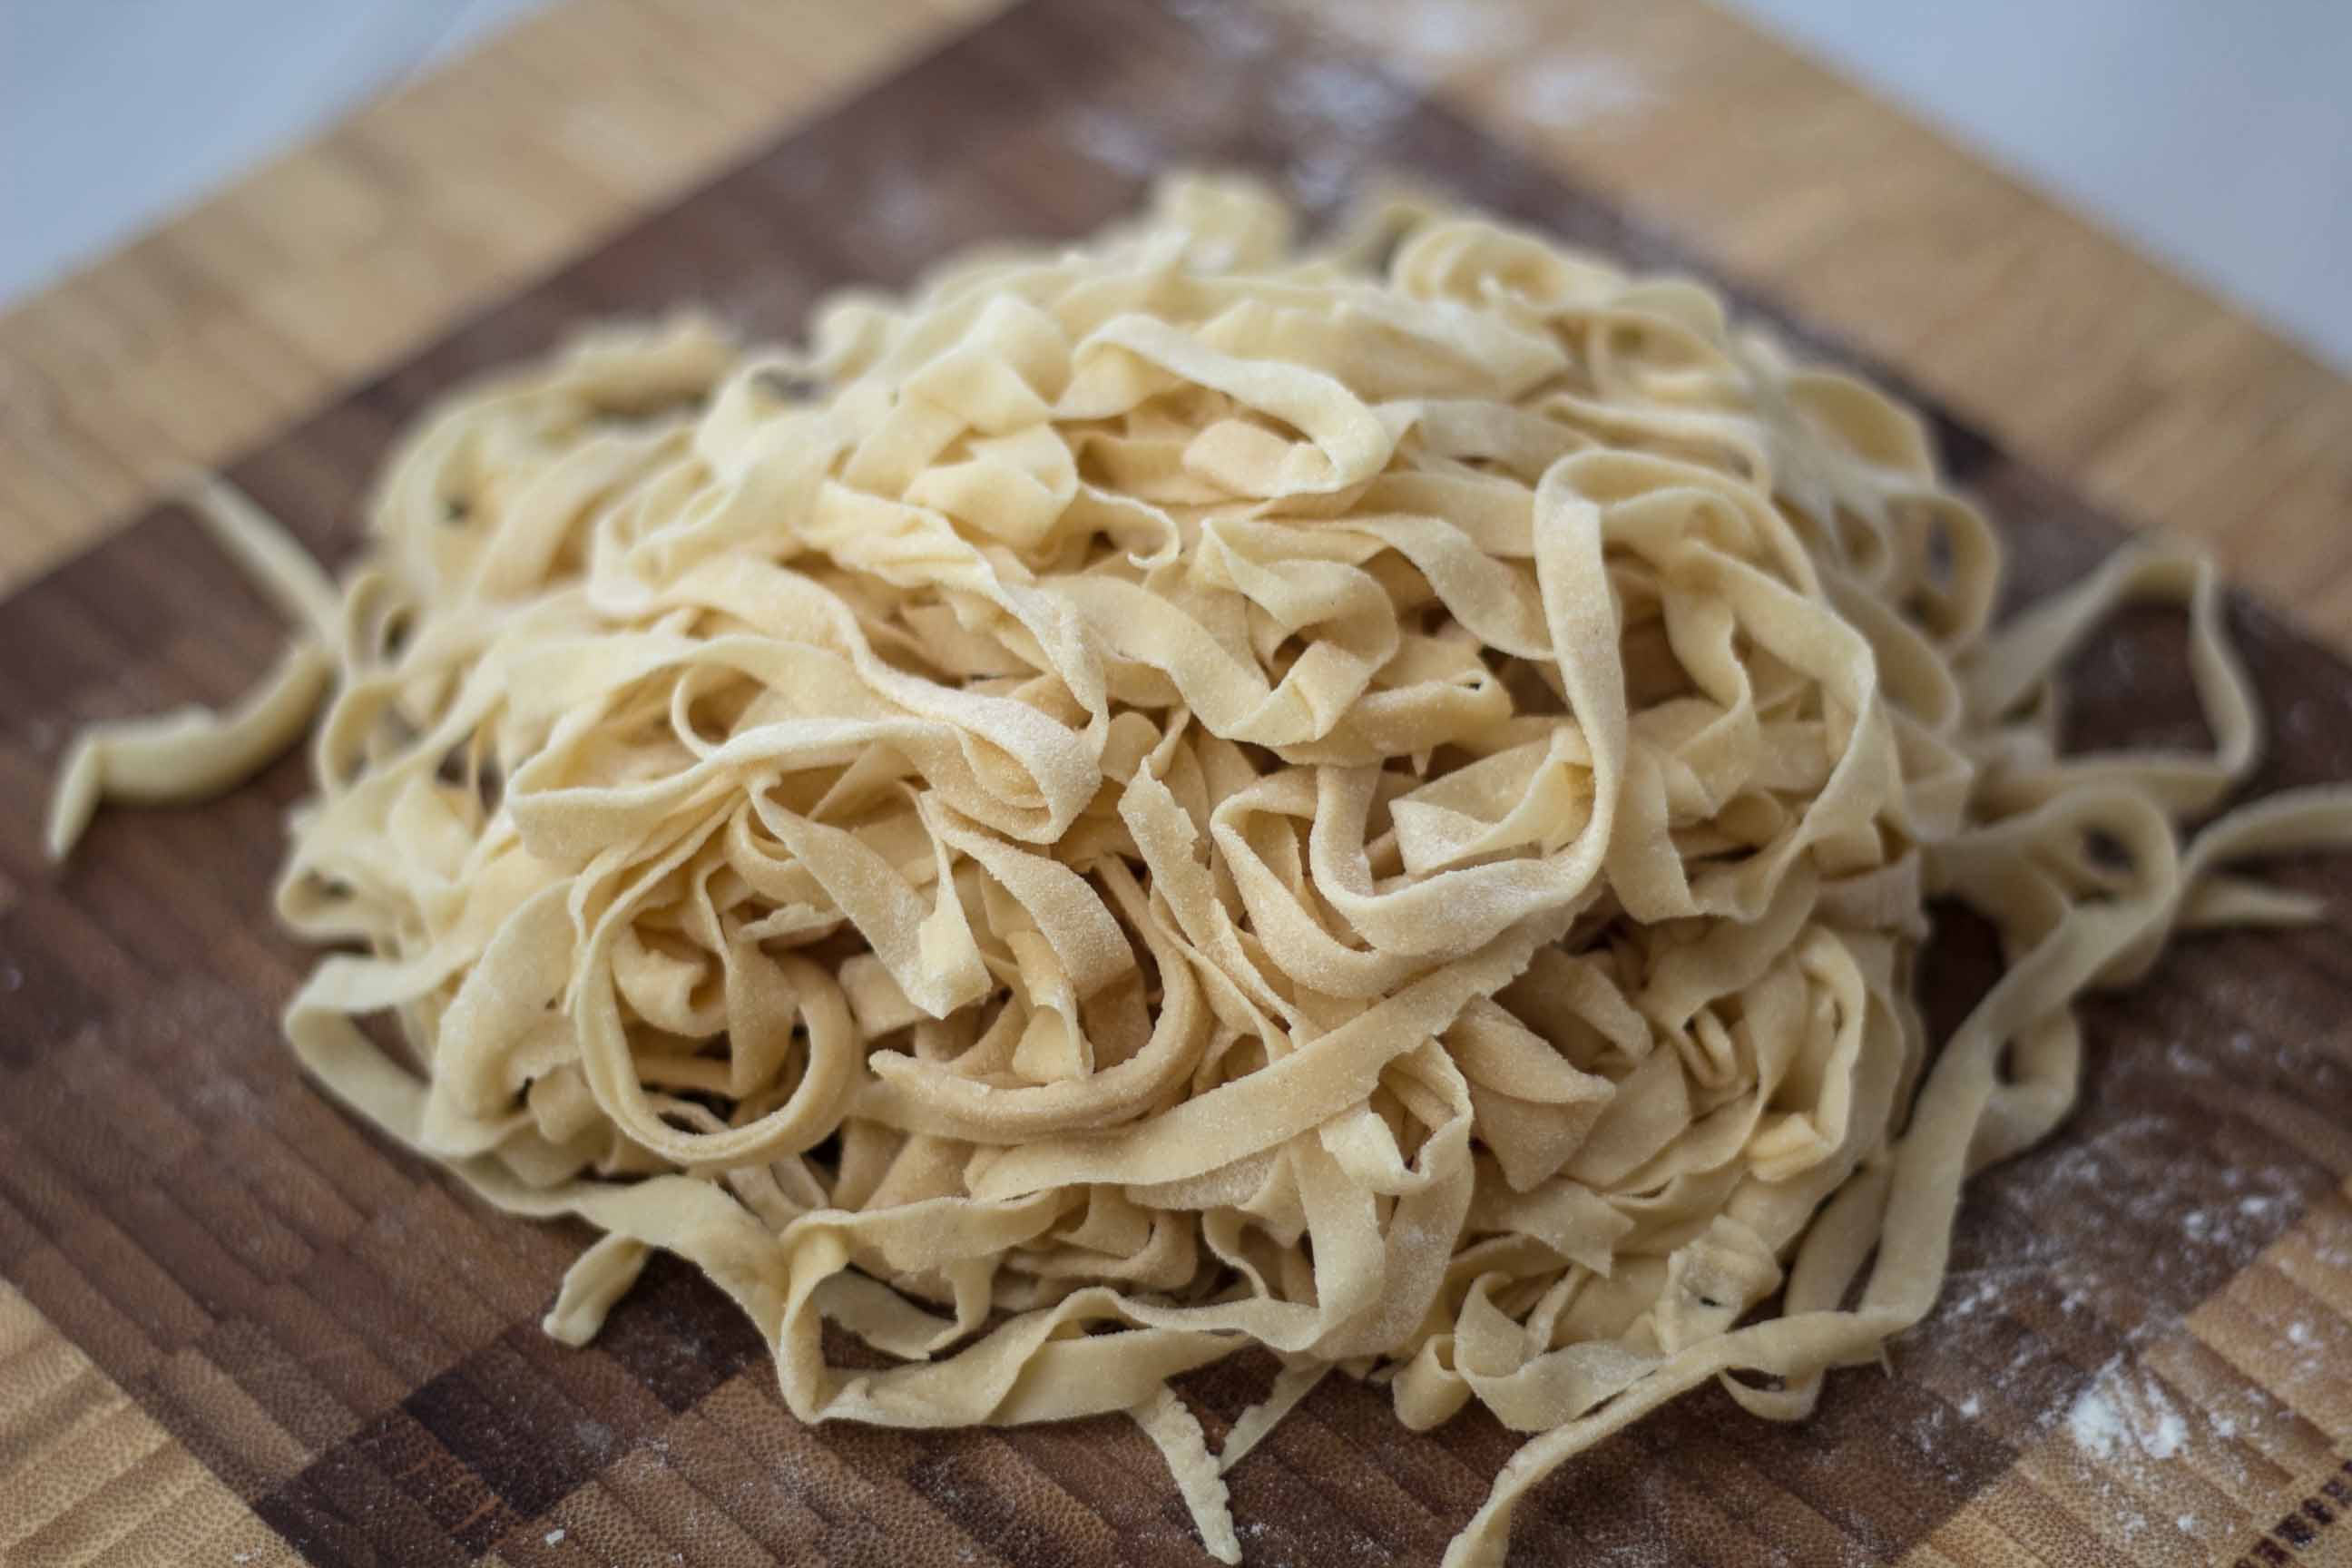 Recipe for Homemade Pasta the Nordic Way - Only Two Ingredients!